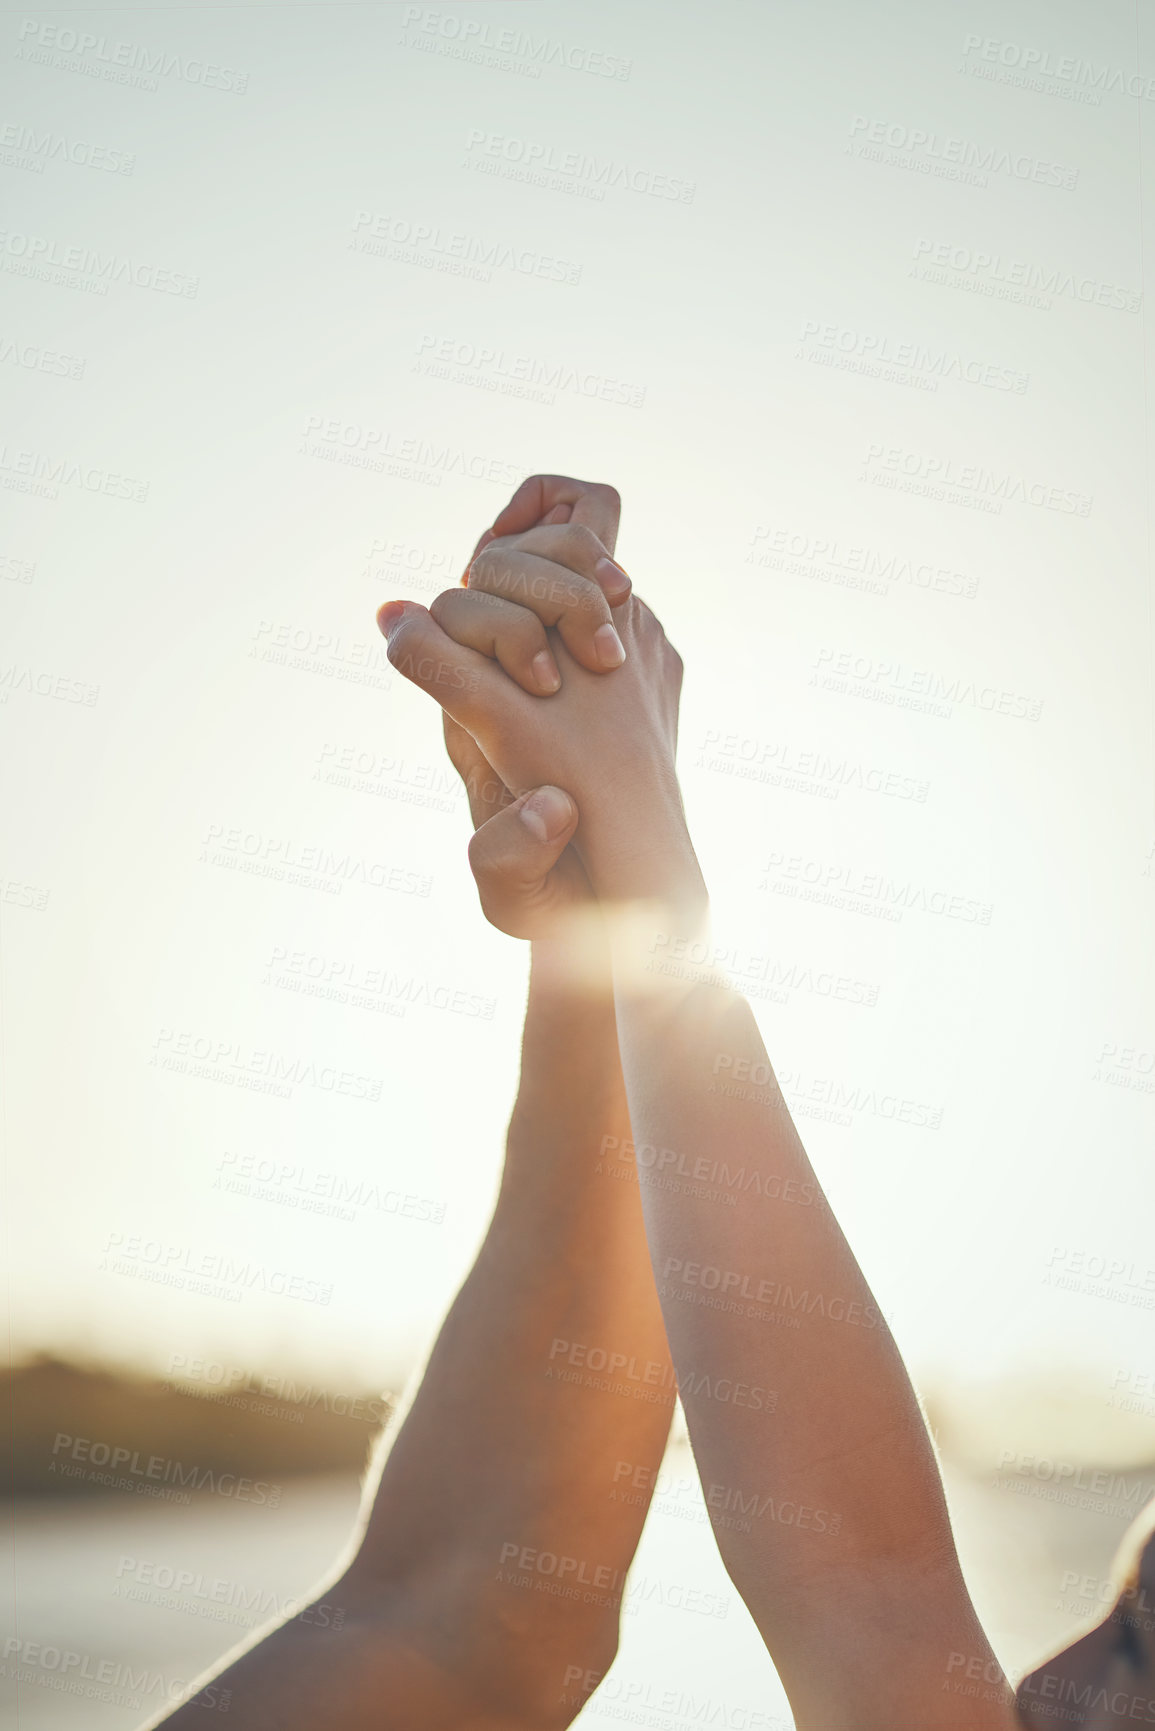 Buy stock photo Shot of a couple holding hands and arms raised outdoors